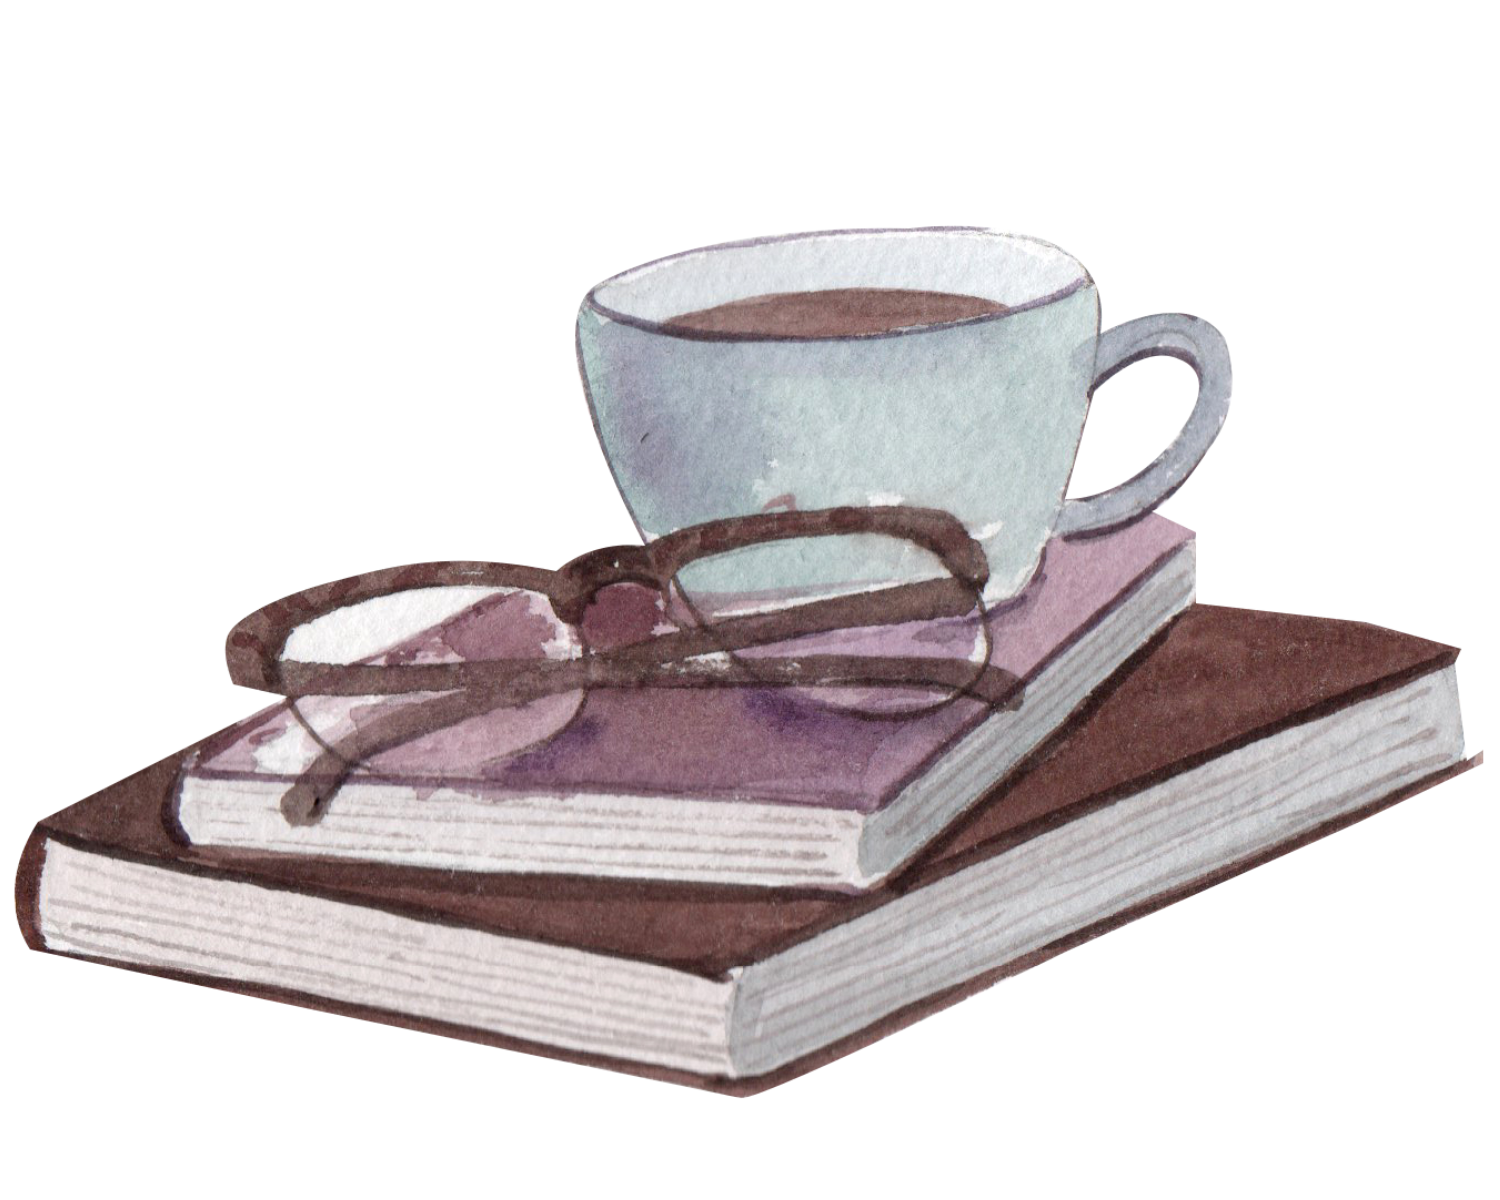 watercolor illustration of two books, a pair of glass, and a mug